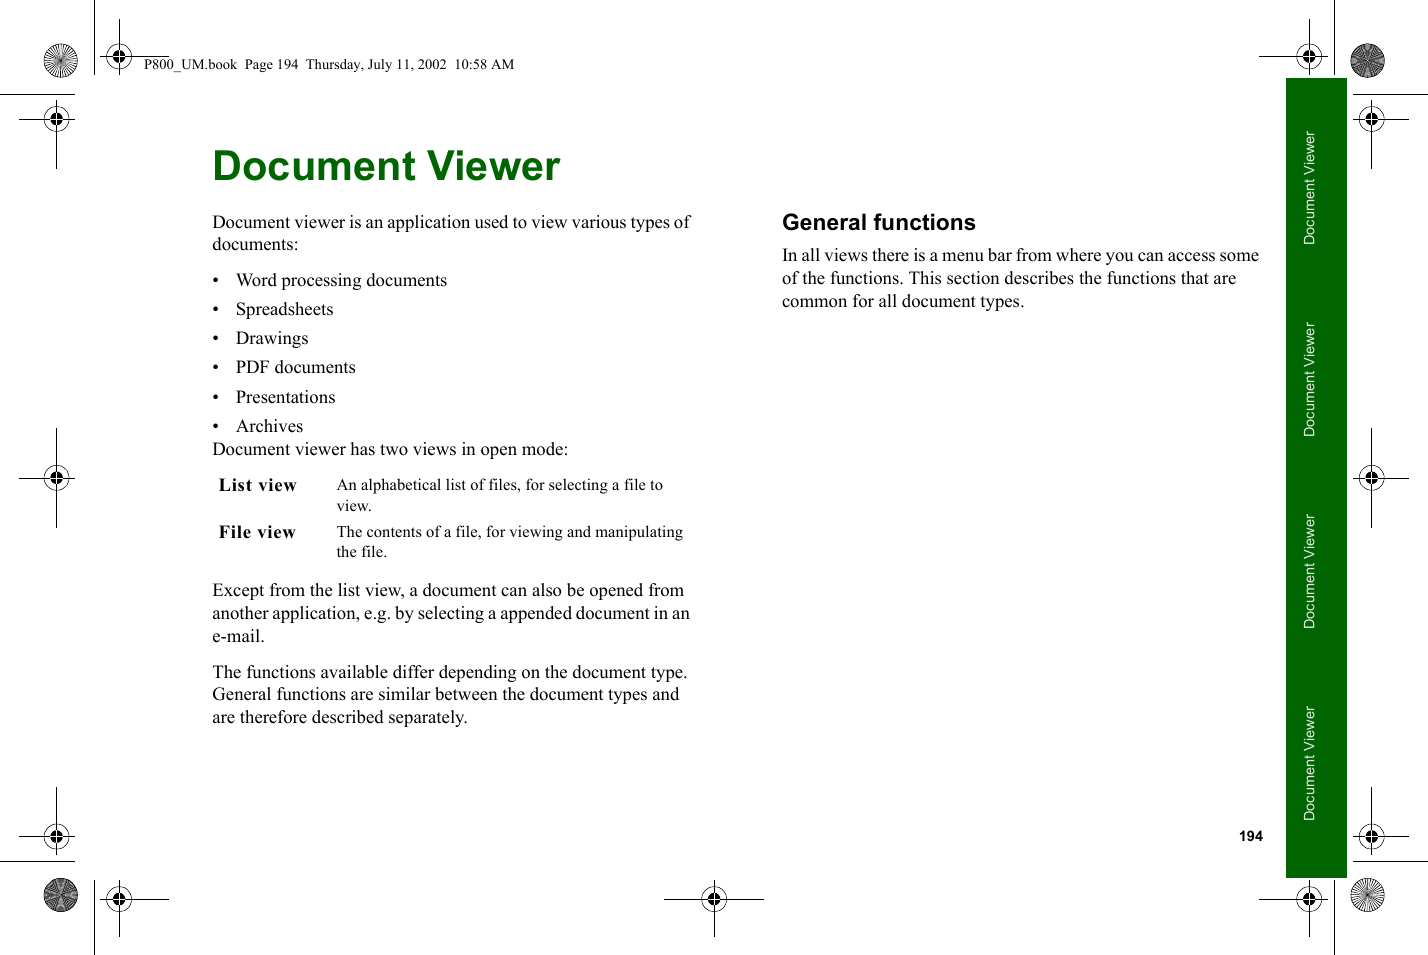 194Document ViewerDocument ViewerDocument ViewerDocument ViewerDocument ViewerDocument viewer is an application used to view various types of documents:• Word processing documents• Spreadsheets•Drawings• PDF documents• Presentations•ArchivesDocument viewer has two views in open mode:Except from the list view, a document can also be opened from another application, e.g. by selecting a appended document in an e-mail.The functions available differ depending on the document type. General functions are similar between the document types and are therefore described separately.General functionsIn all views there is a menu bar from where you can access some of the functions. This section describes the functions that are common for all document types.List view An alphabetical list of files, for selecting a file to view.File view The contents of a file, for viewing and manipulating the file.P800_UM.book  Page 194  Thursday, July 11, 2002  10:58 AM